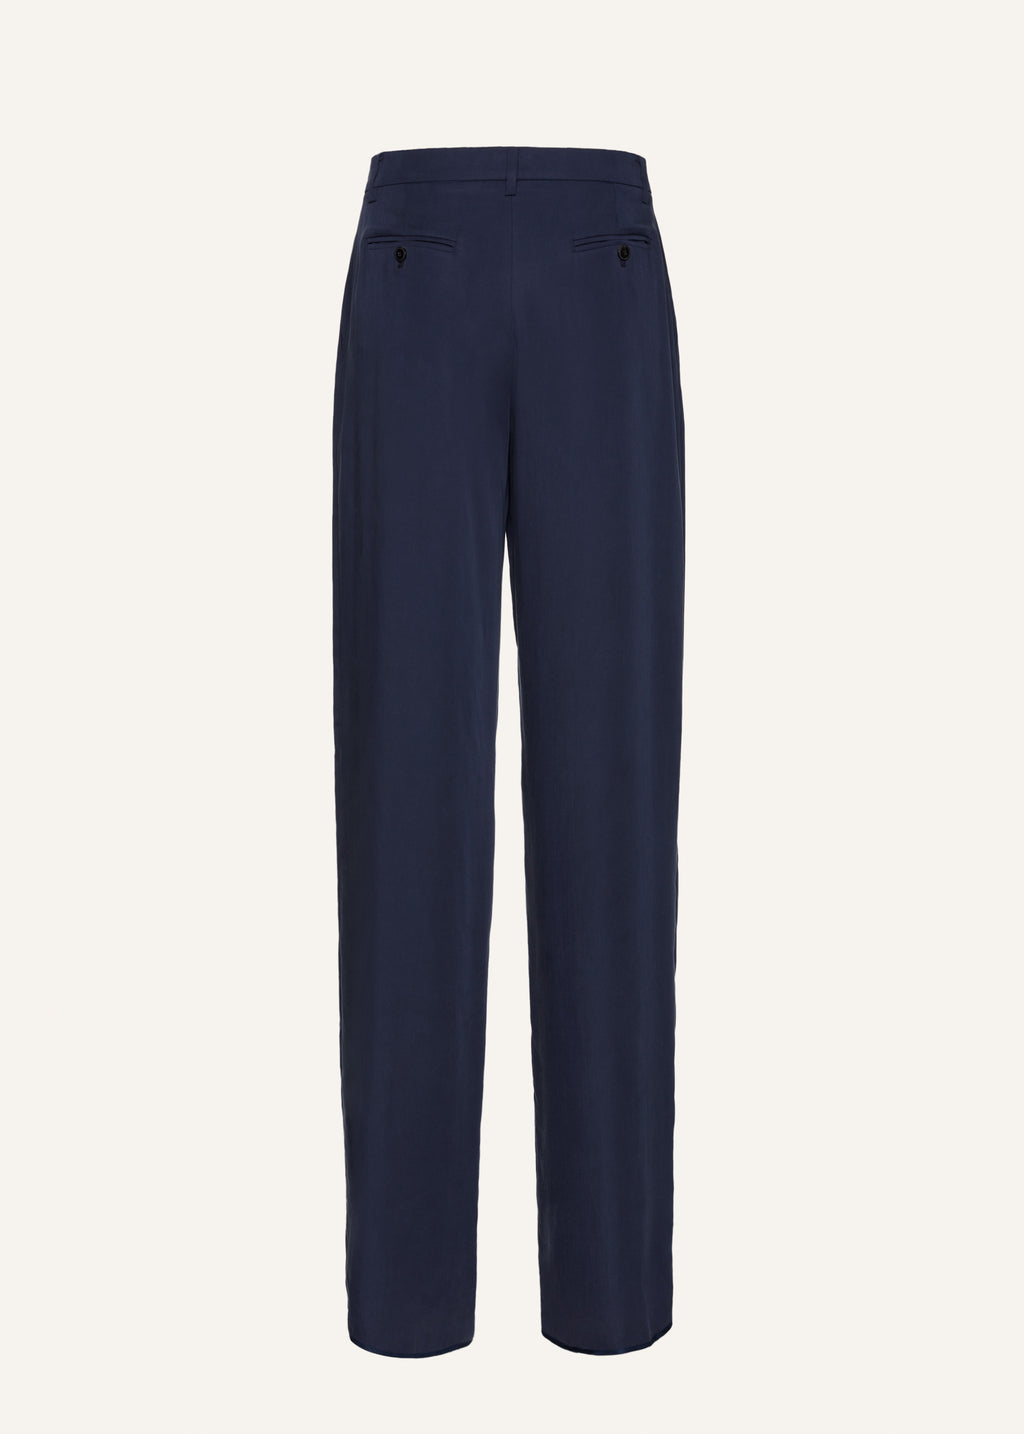 Tailored Navy Trousers